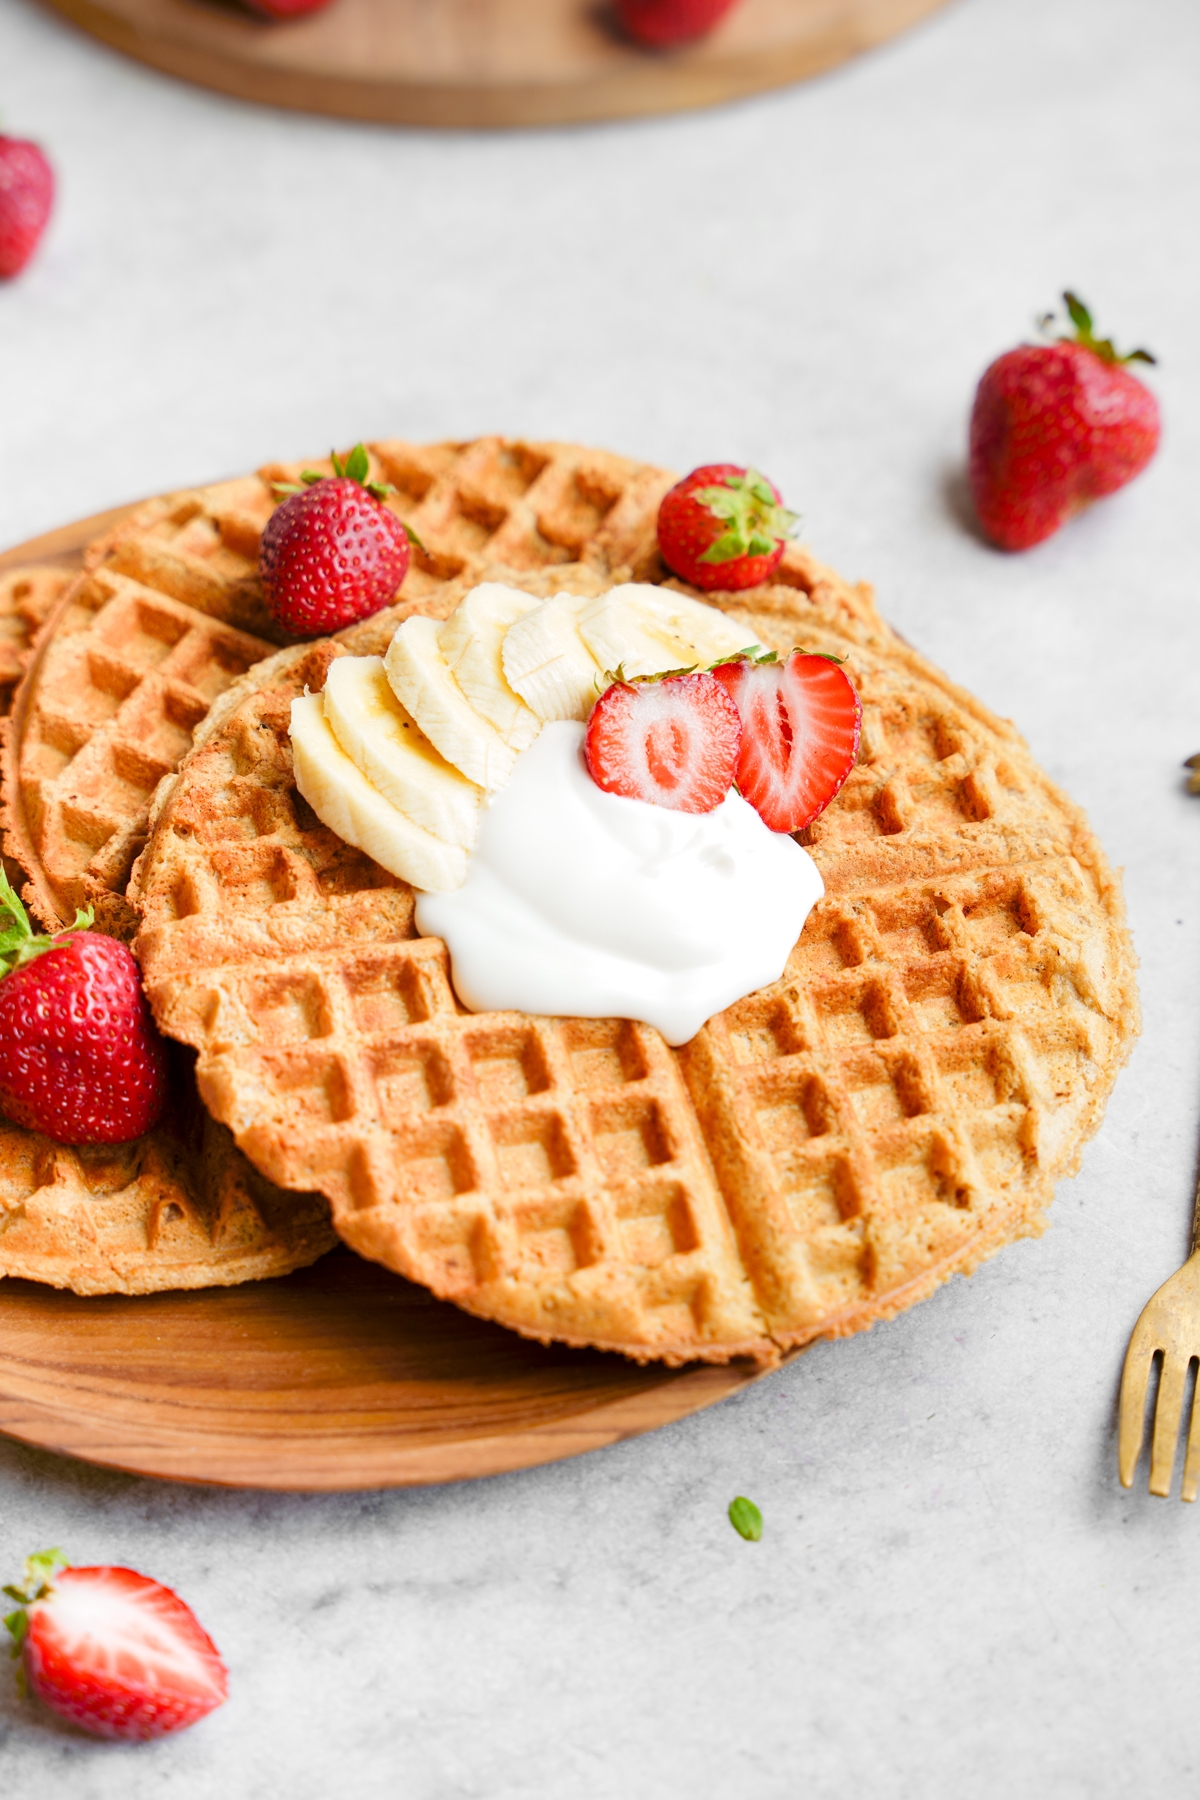 the vegan protein waffles close up to show the crispy texture